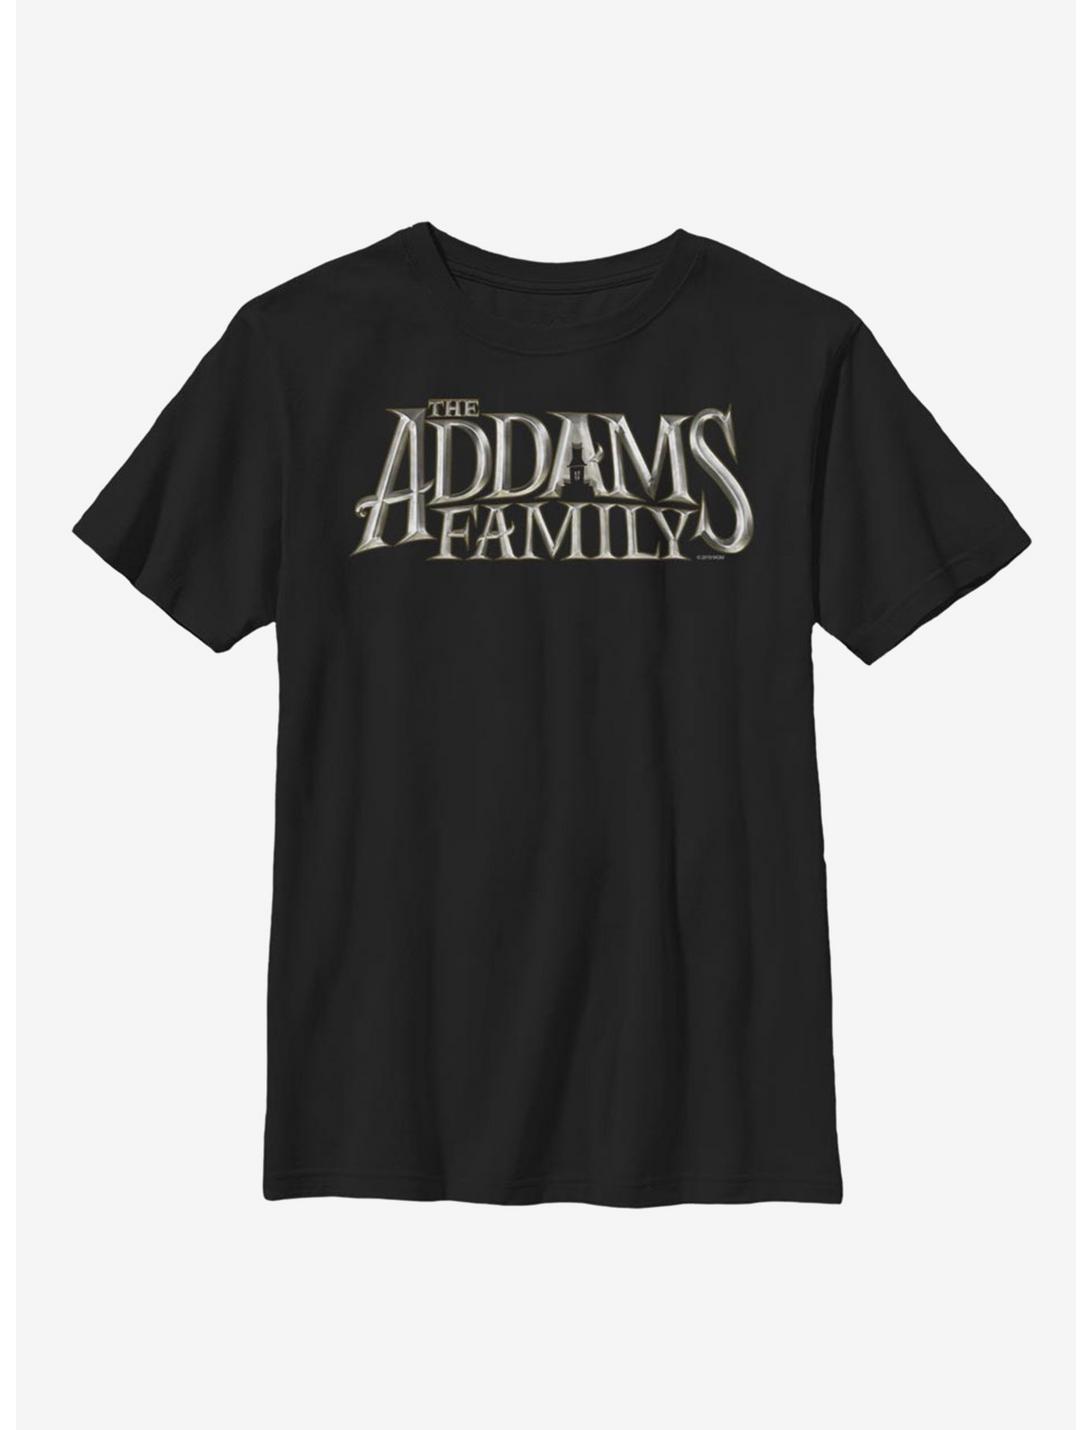 The Addams Family Theatrical Logo Youth T-Shirt, BLACK, hi-res